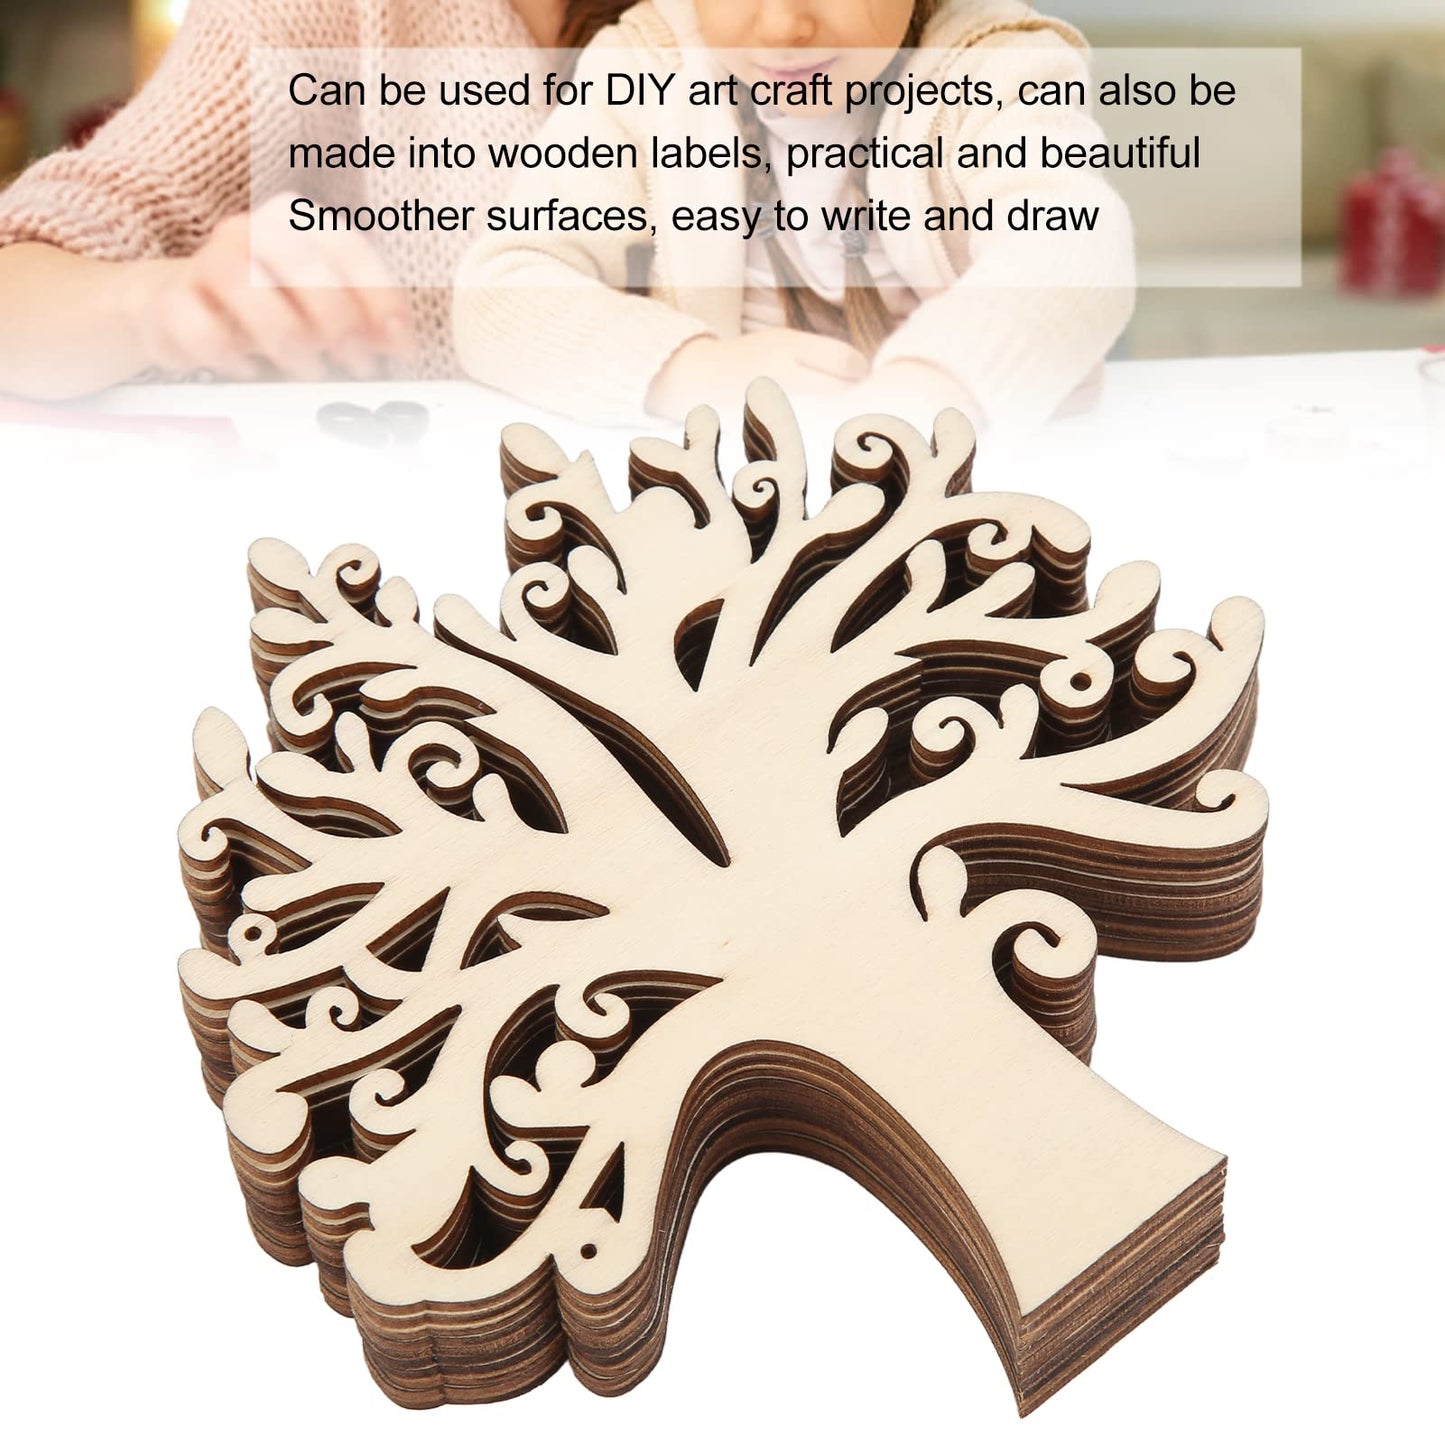 20pcs Blank Wooden Family Tree, Wood Cutout Unfinished Wood Crafts Tree Embellishments for Family Tree Weddings Christmas Ornaments